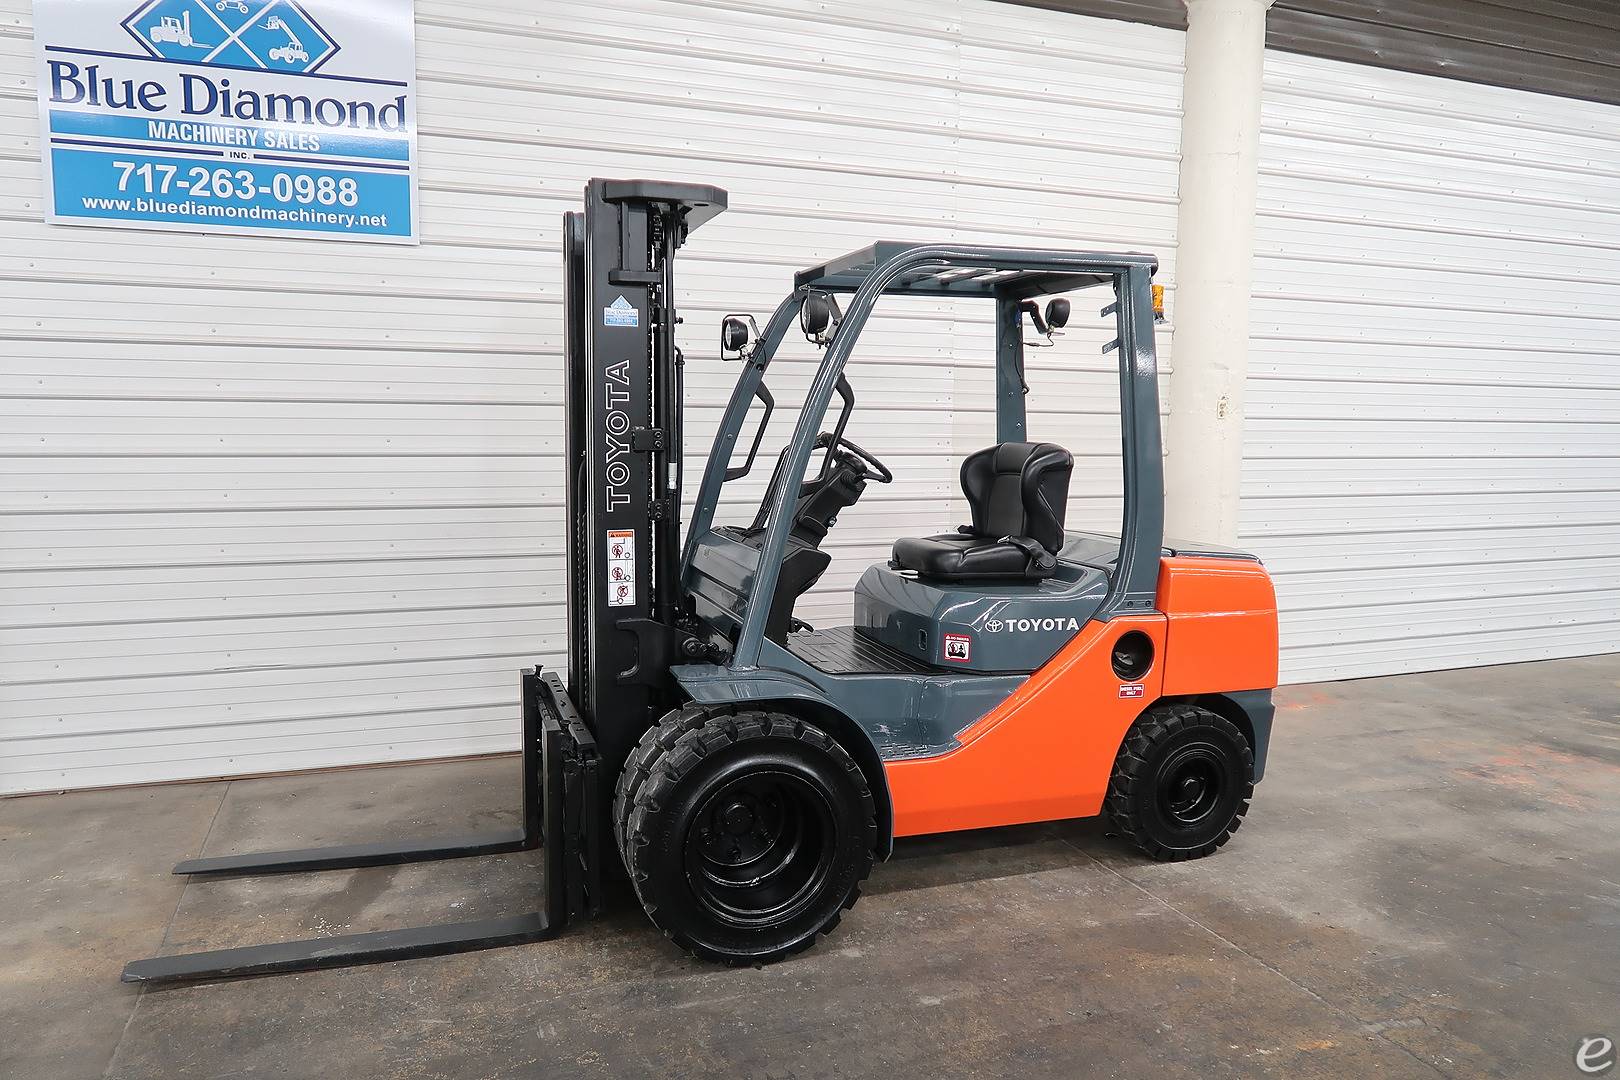 2013 Toyota Pneumatic Tire Forklift...